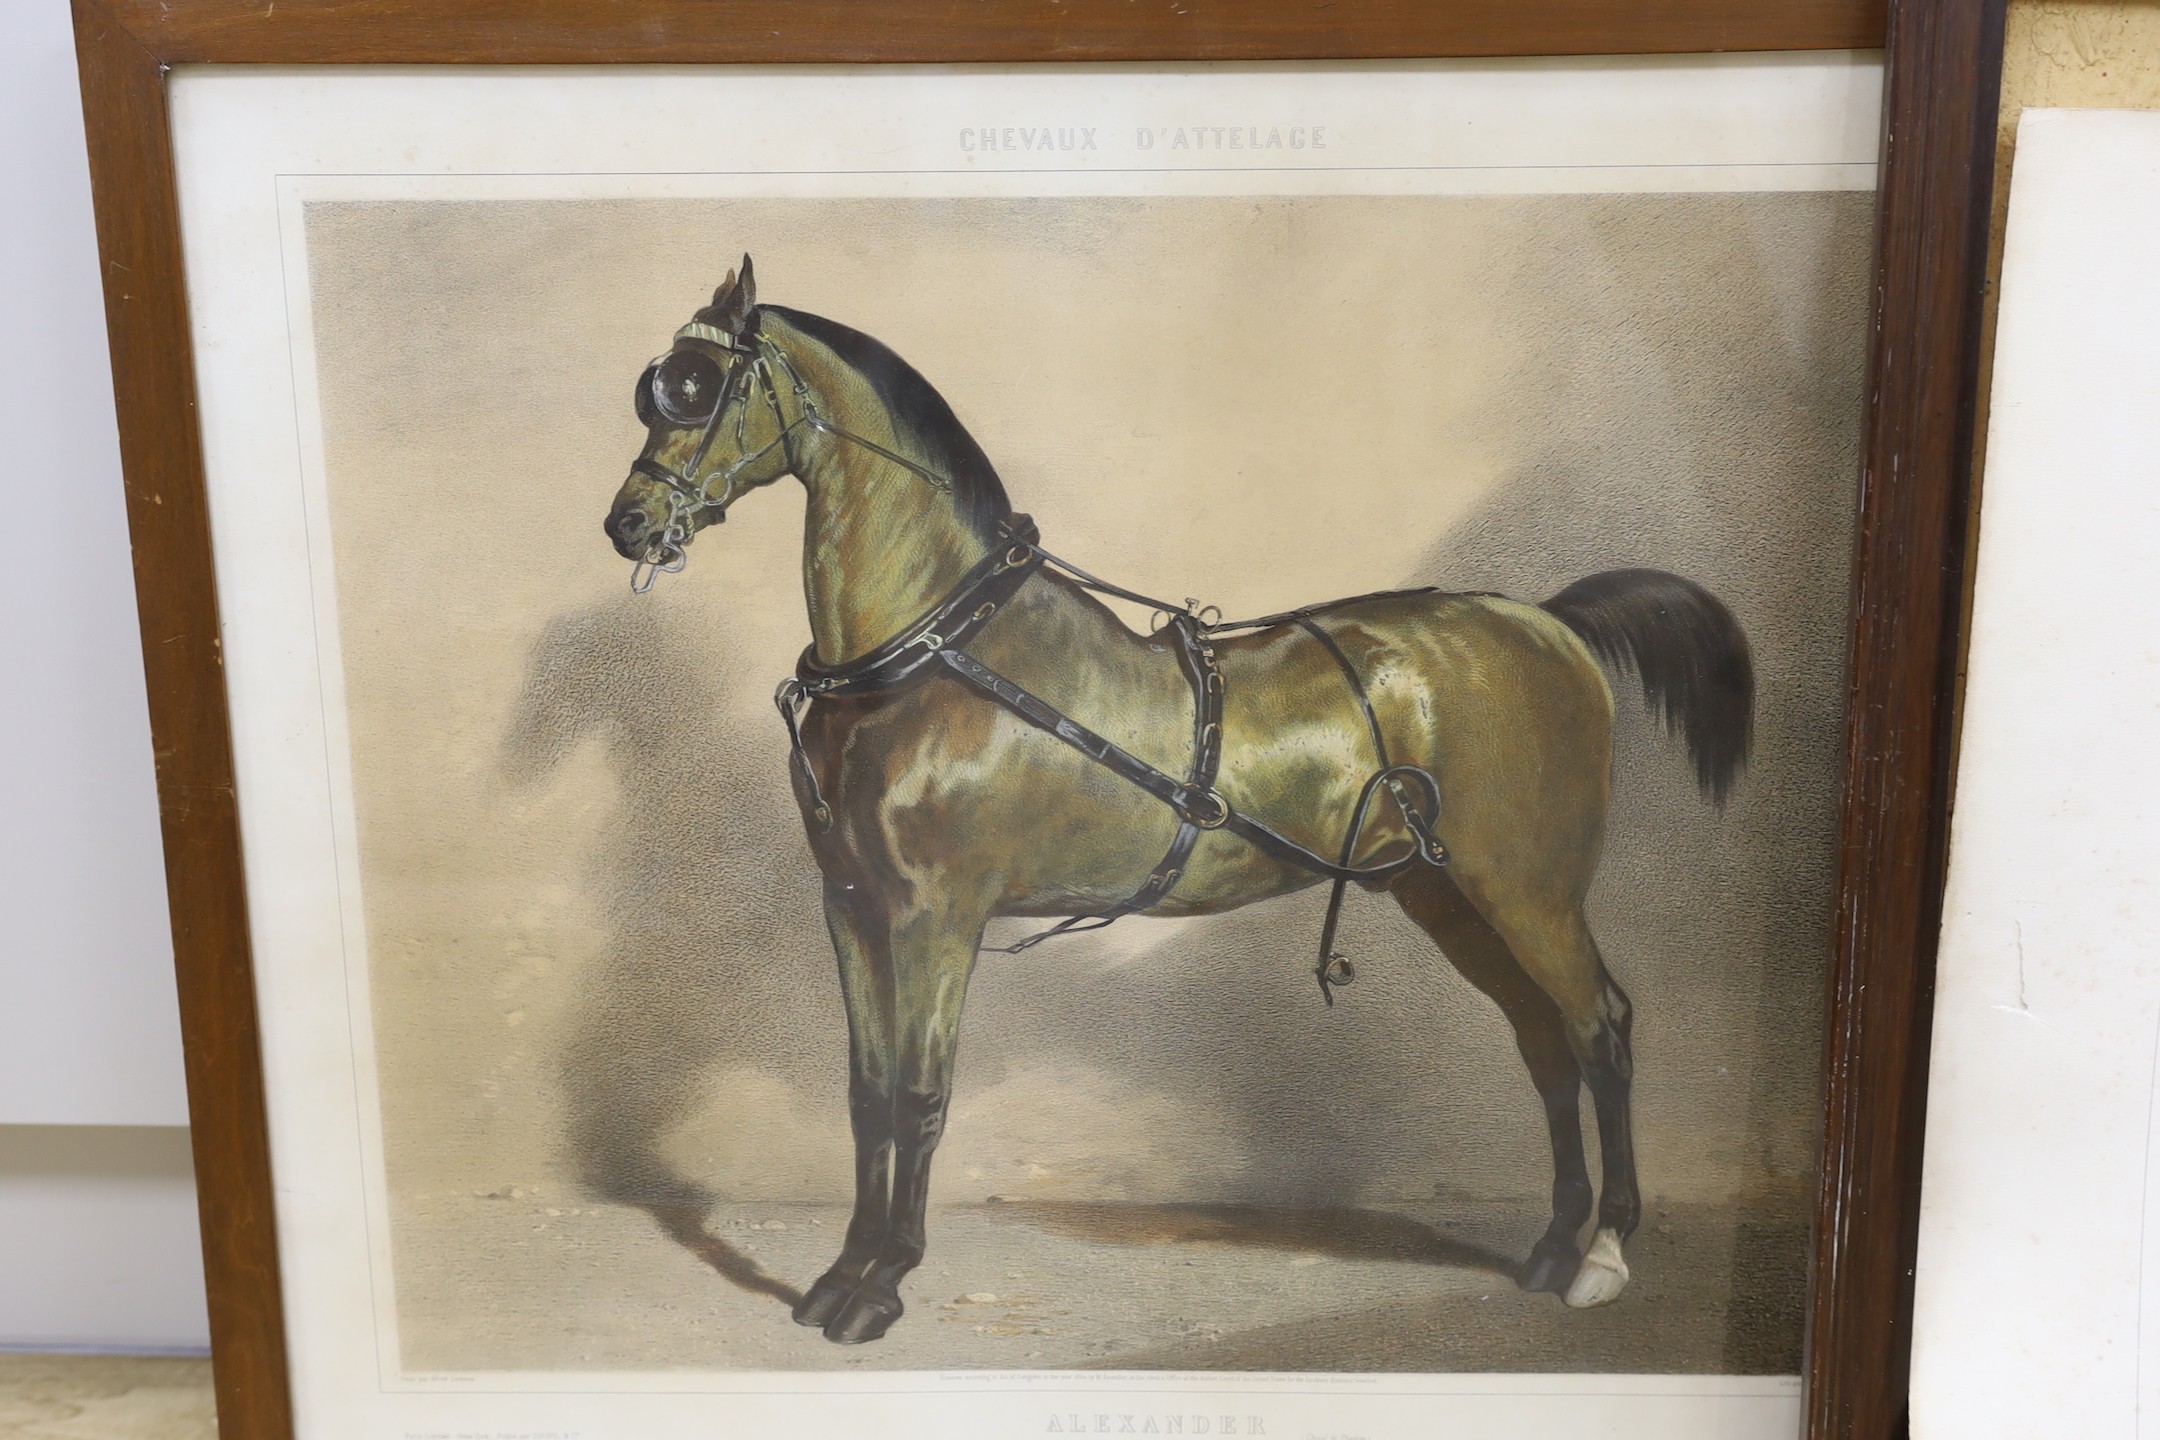 After Dedreux, two equine lithographs, ‘Alexander’ and ‘Ali’, 56 x 67cm